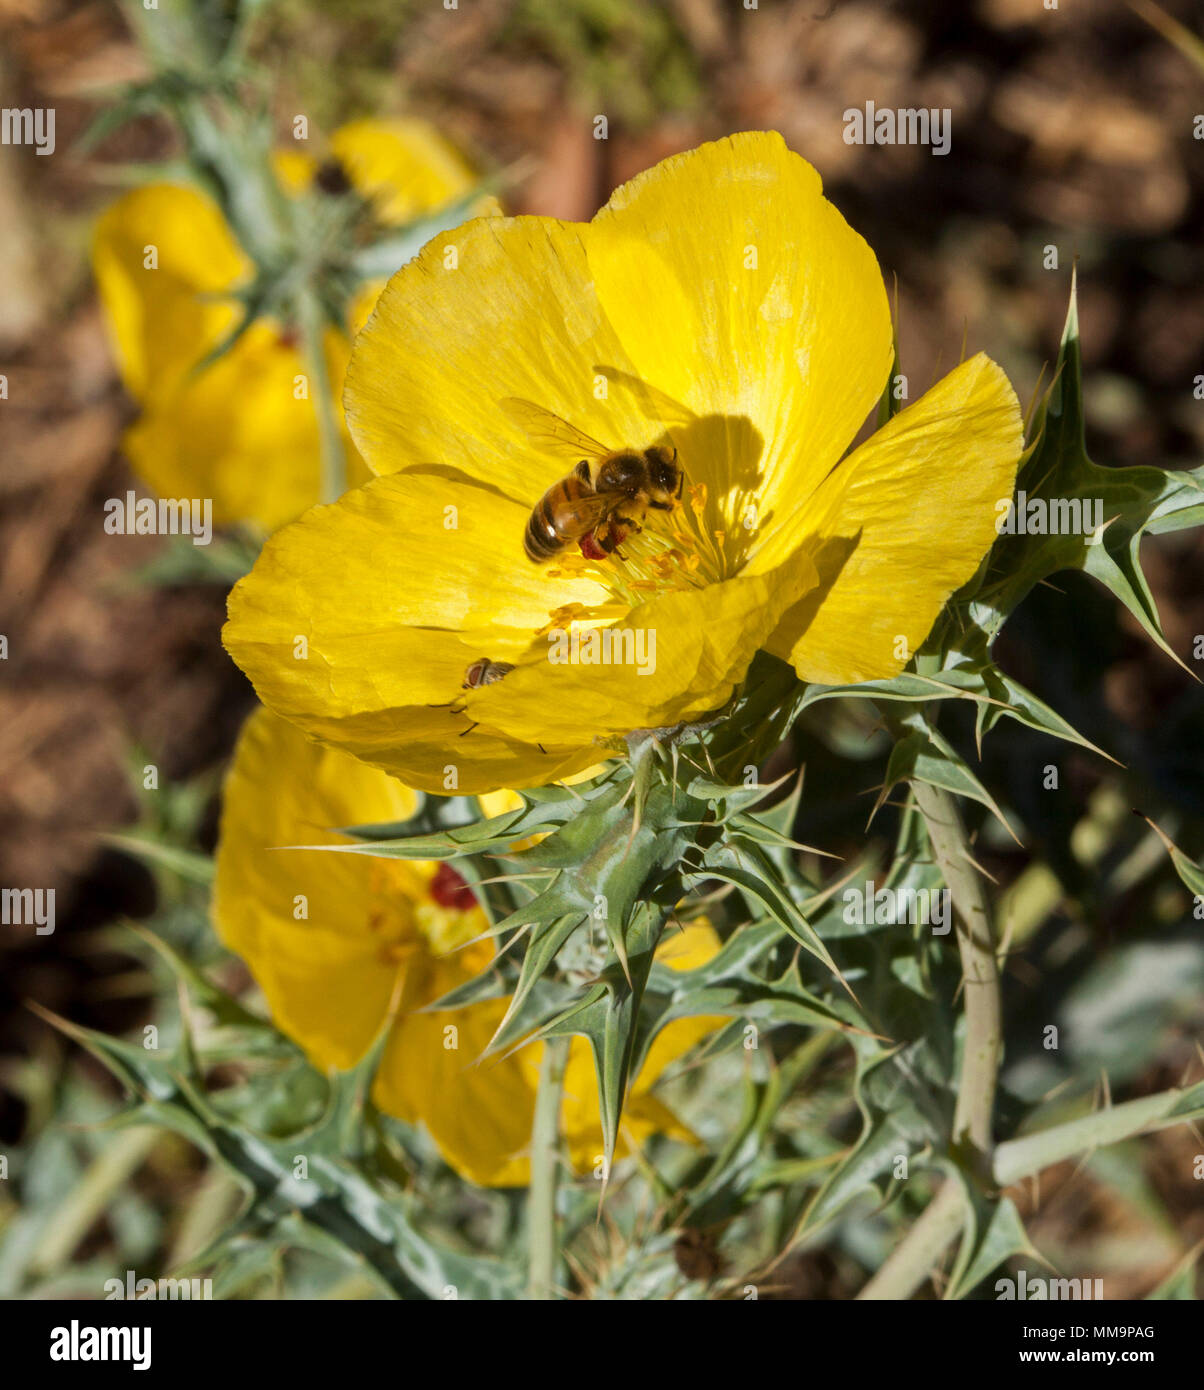 Vivid yellow flower and foliage of Argemone mexicana, Mexican prickly poppy, with bee collecting pollen from this Australian weed species Stock Photo